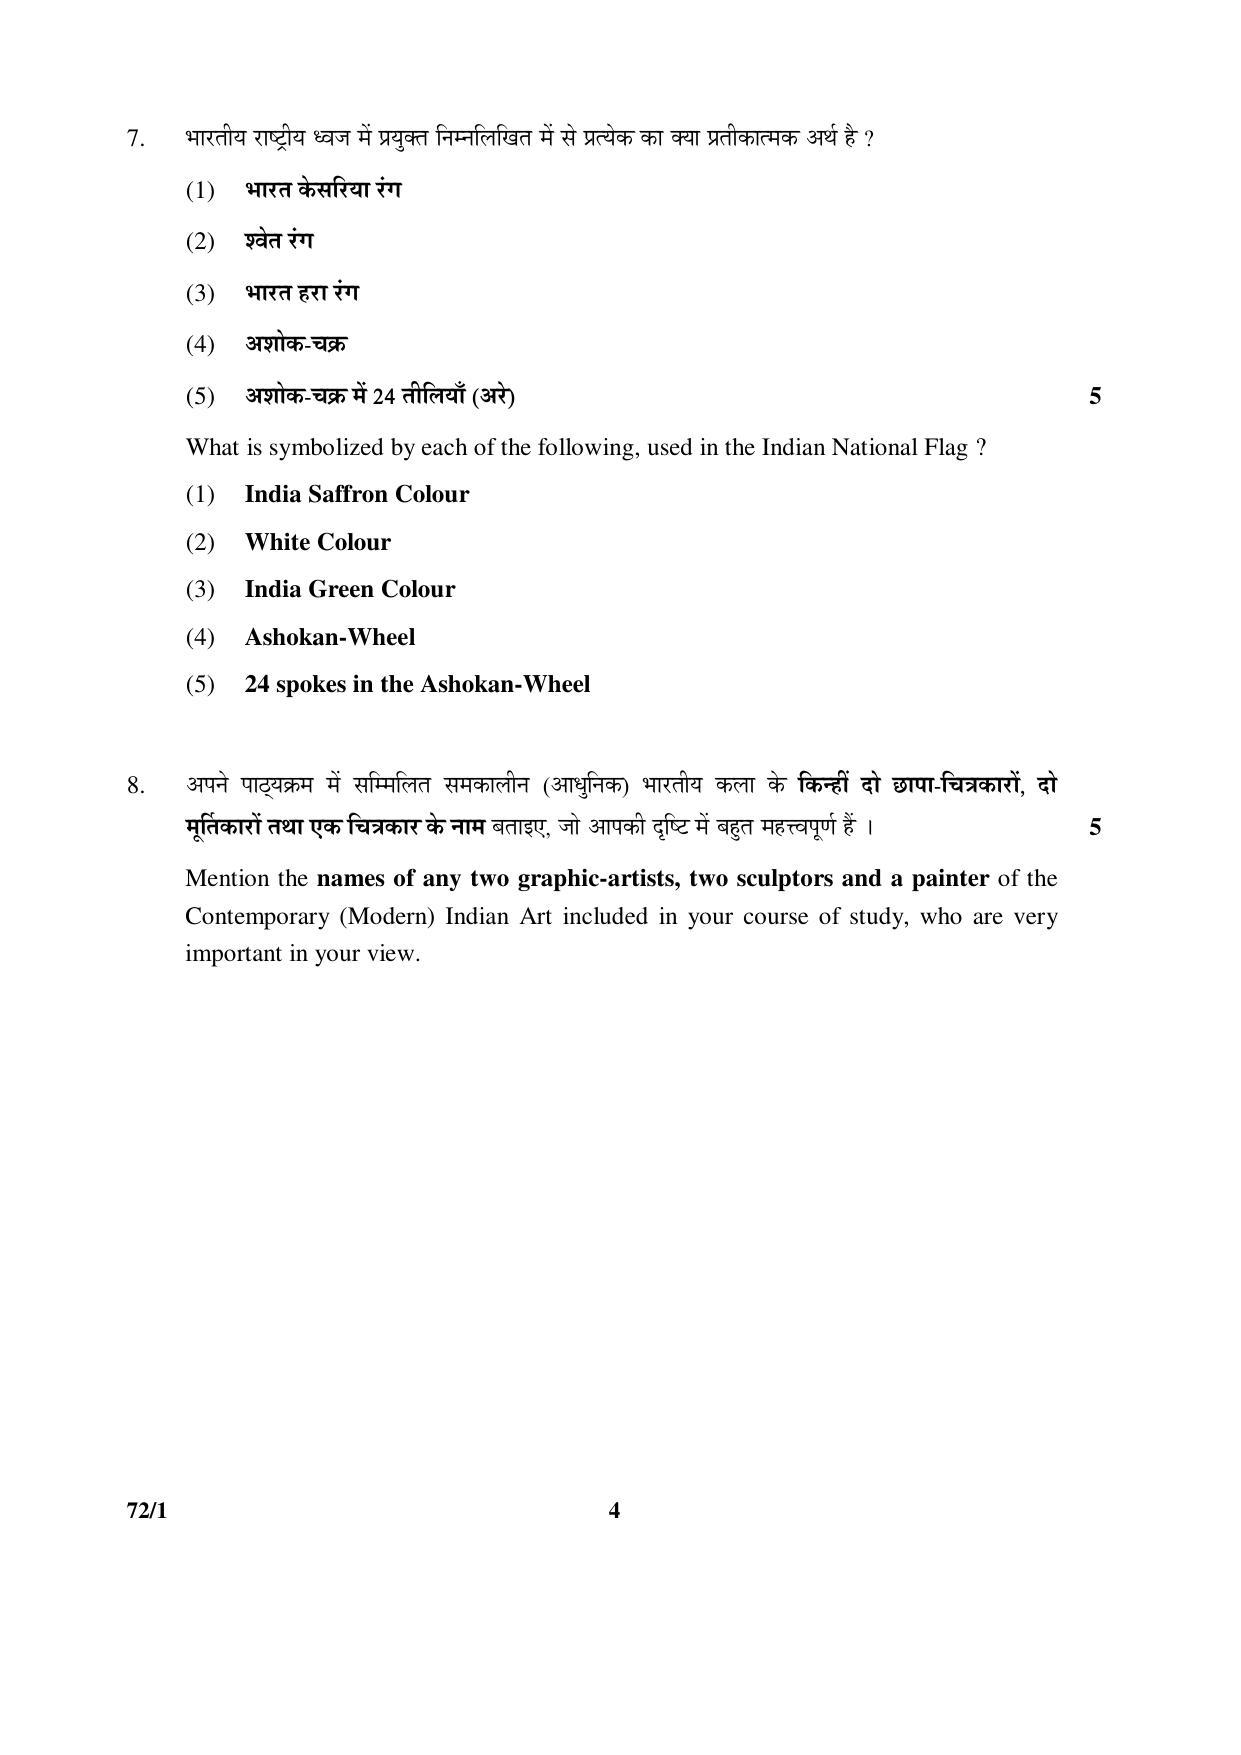 CBSE Class 12 72-1 COMMERCIAL ART (Theory) 2016 Question Paper - Page 4